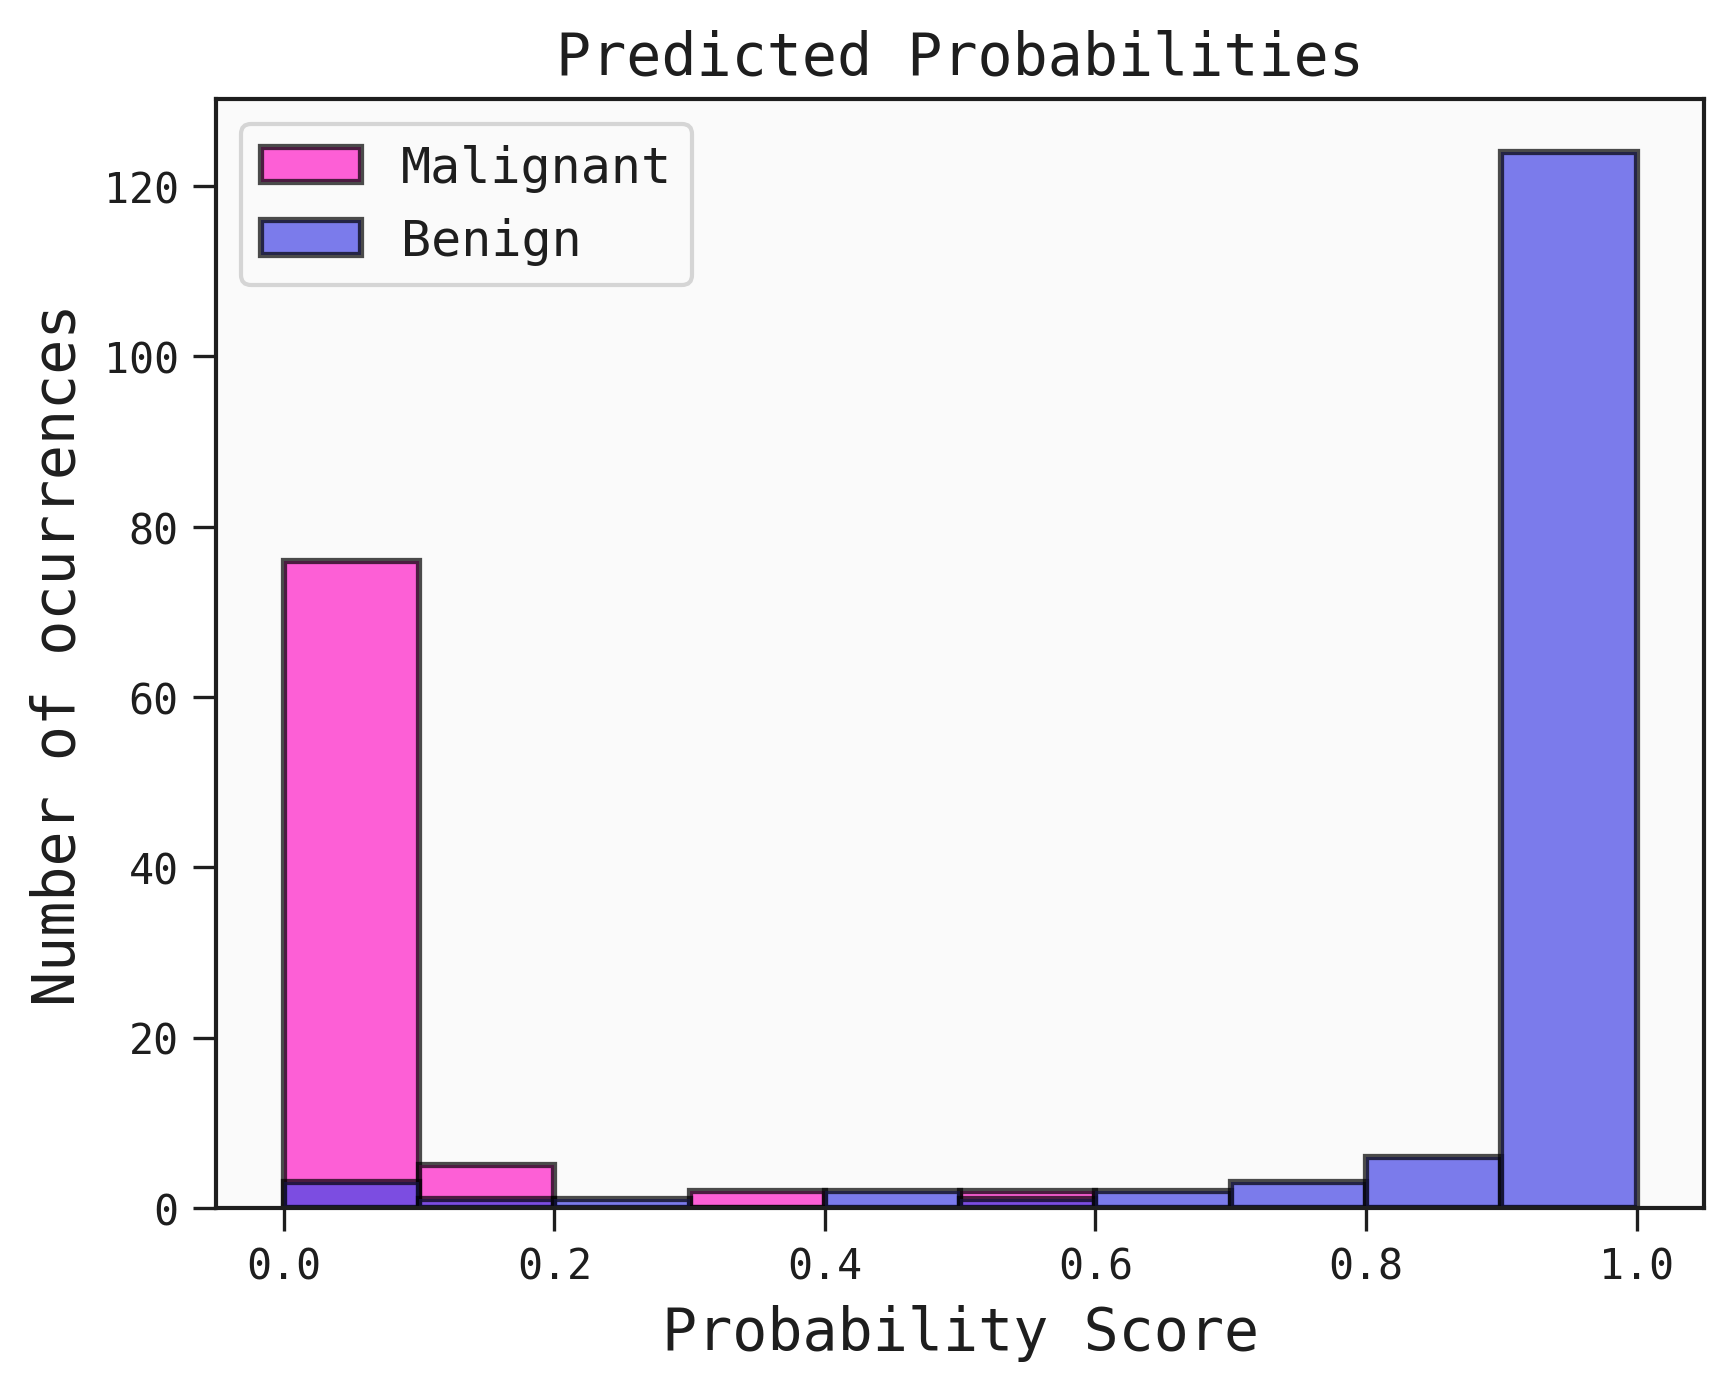 Plot with custom legend, showing the binned probability scores for the predictions